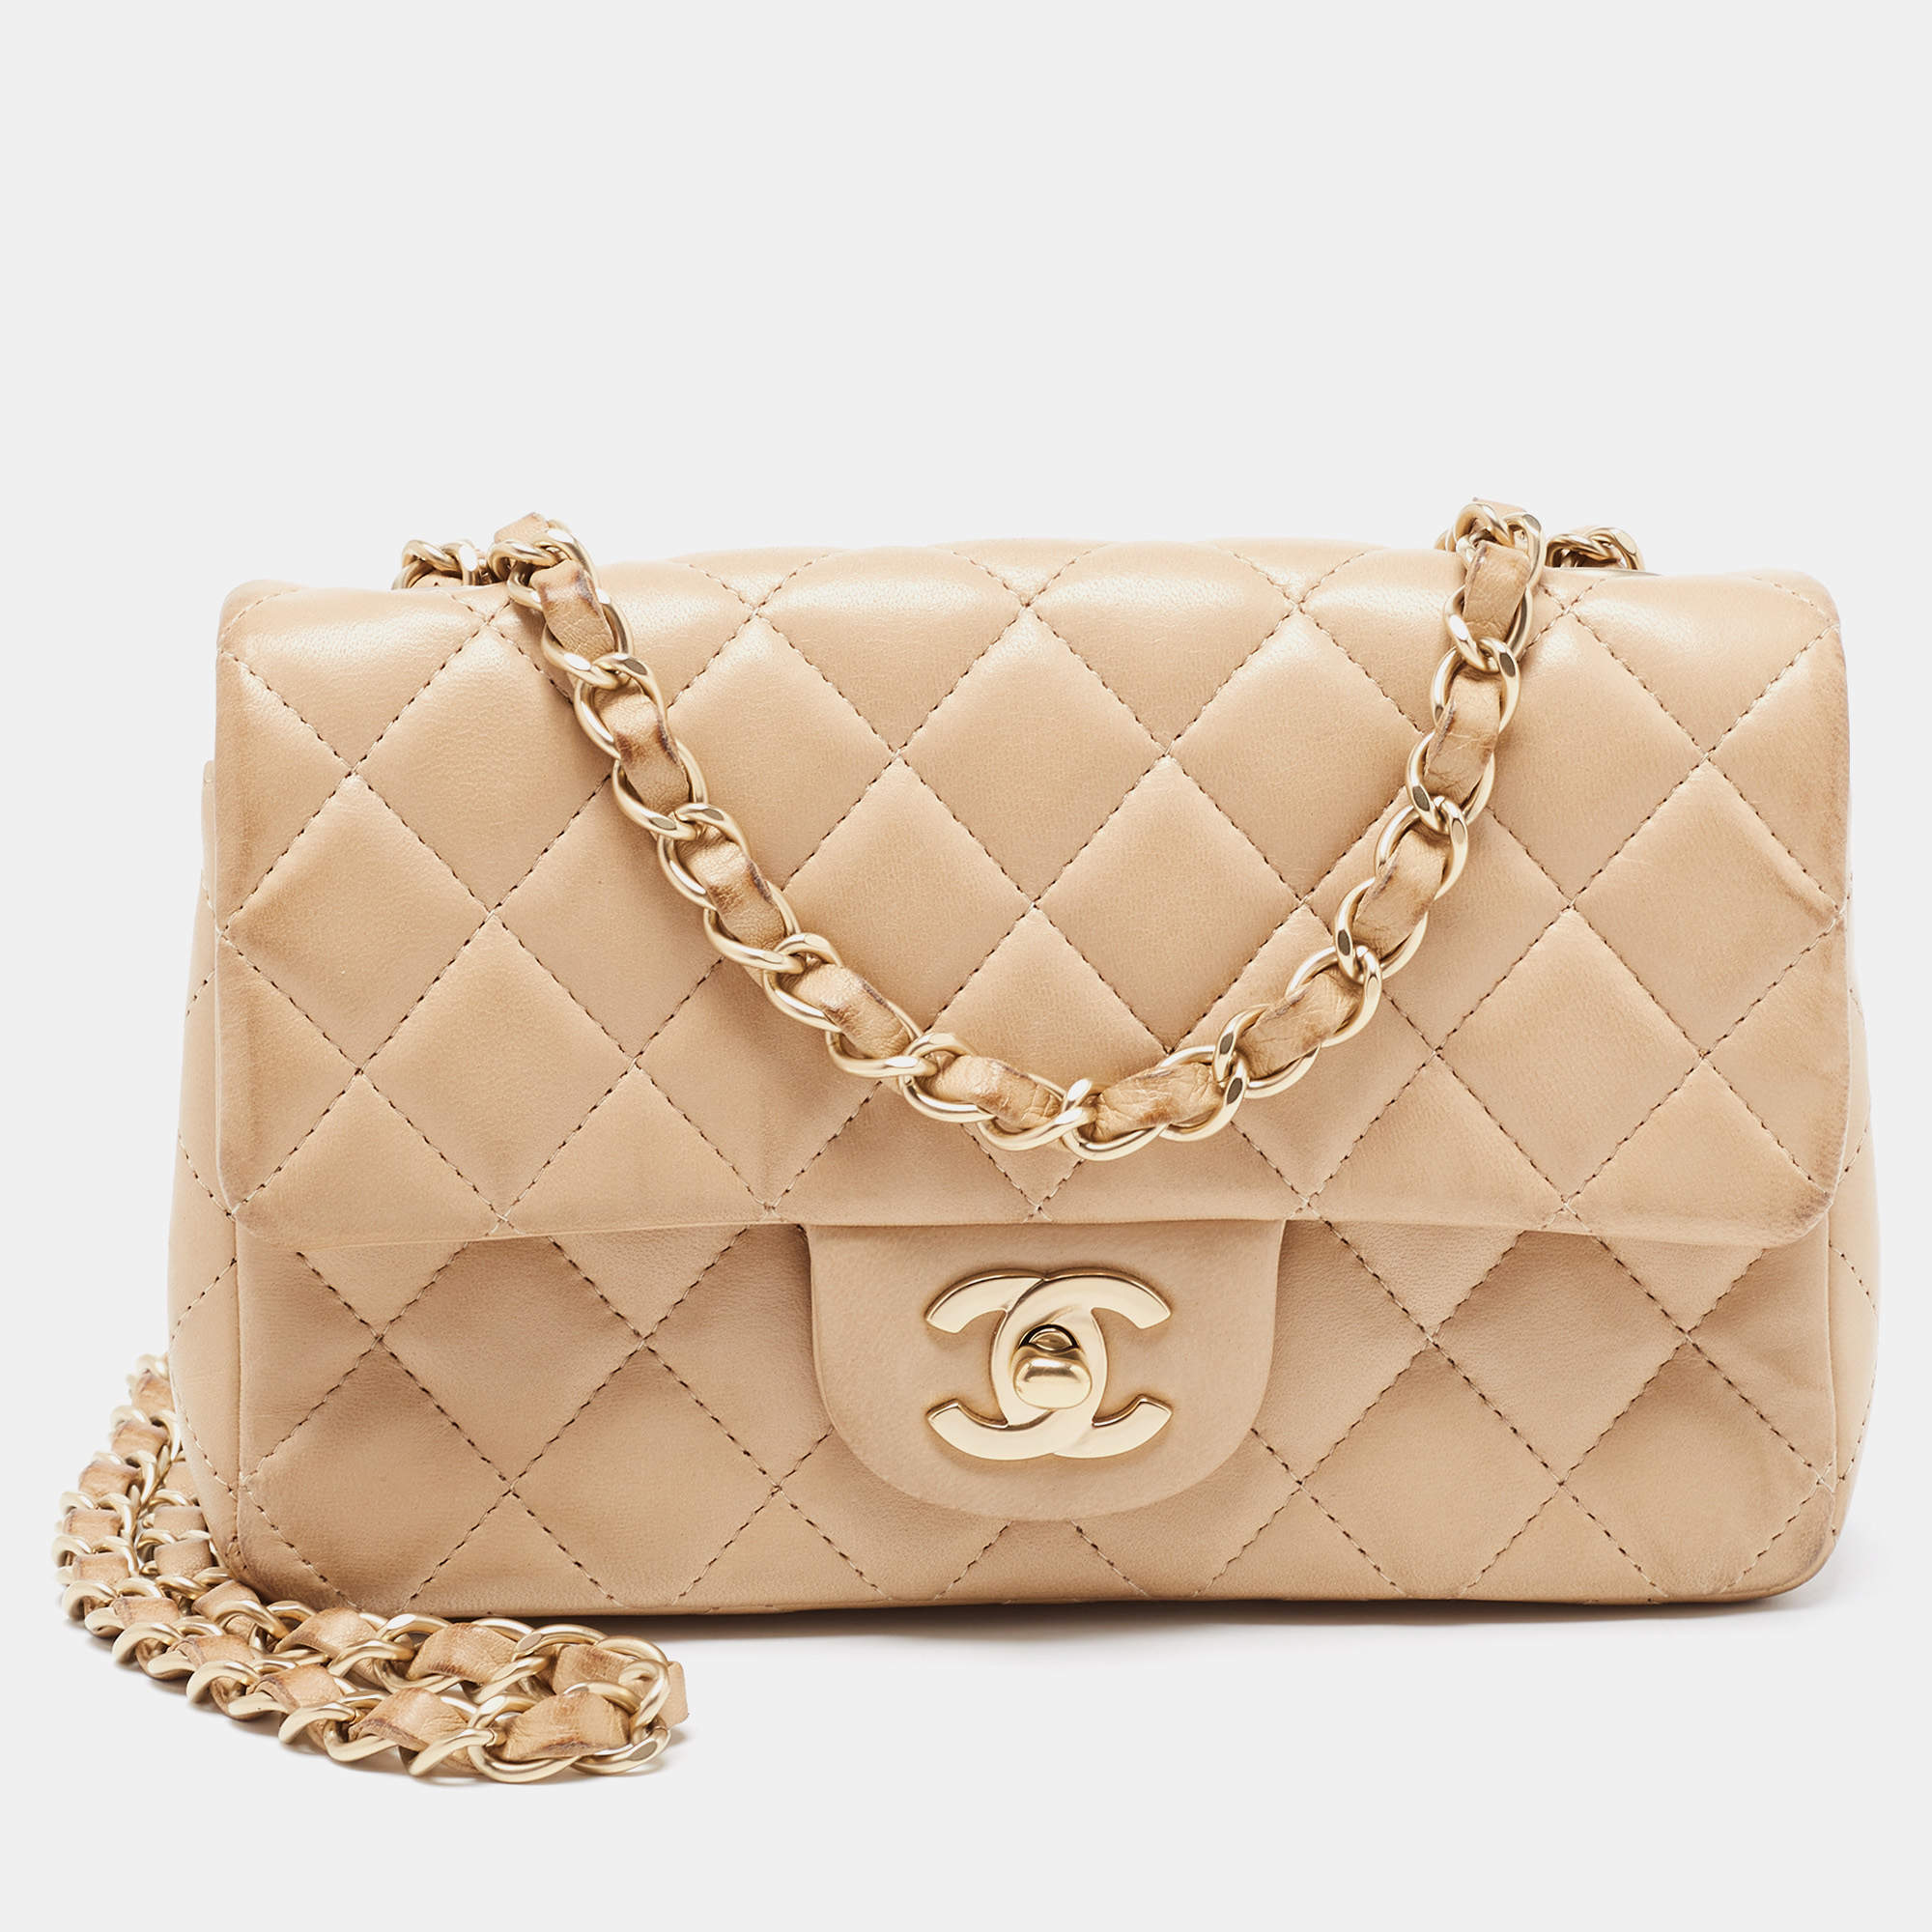 Chanel Beige Quilted Leather New Mini Classic Flap Bag Chanel | The ...